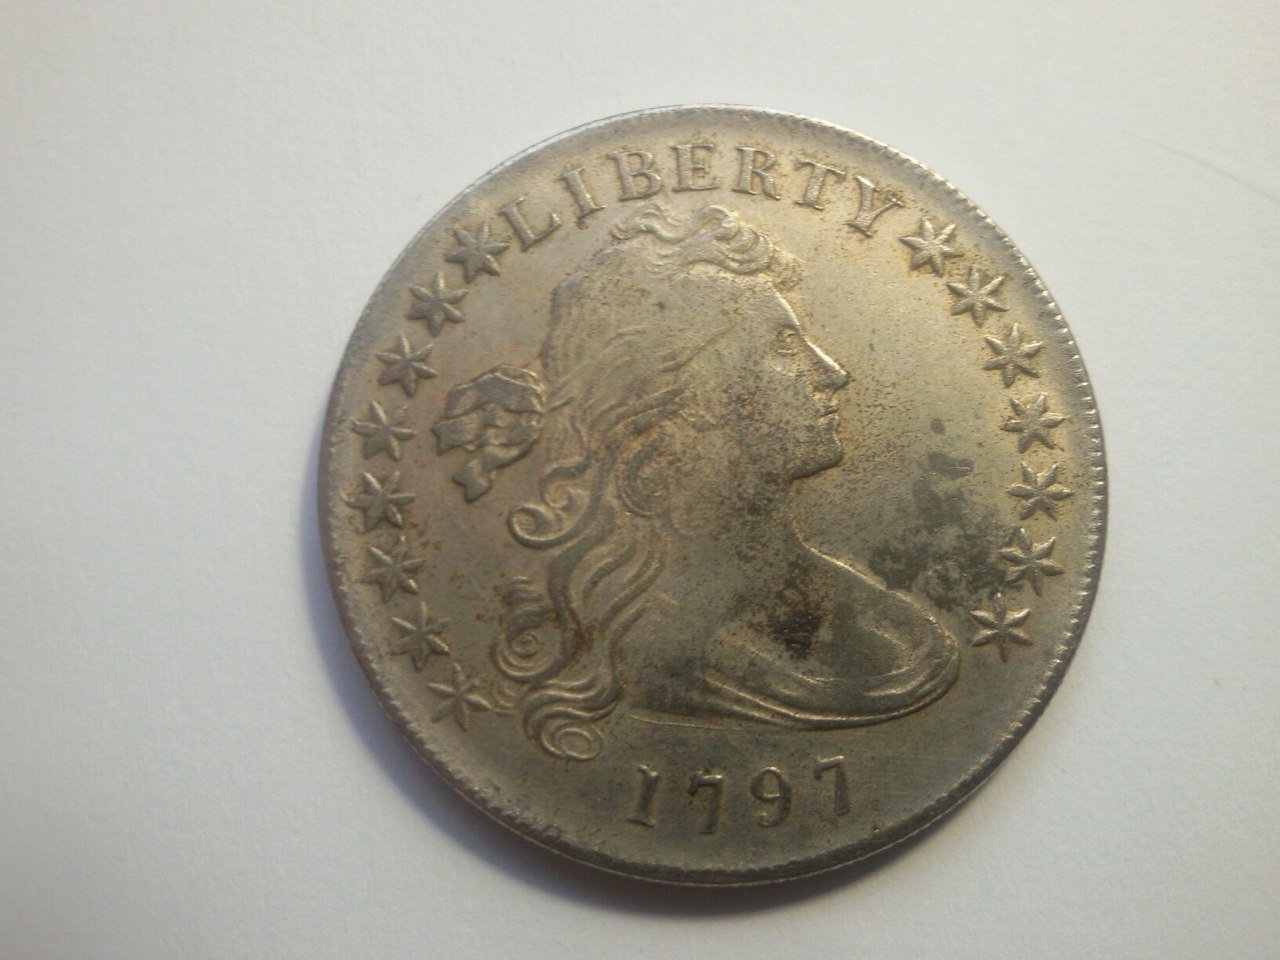 A find in the ground near the airport. - My, Coin, Rare coins, USA, Find, Numismatics, Help